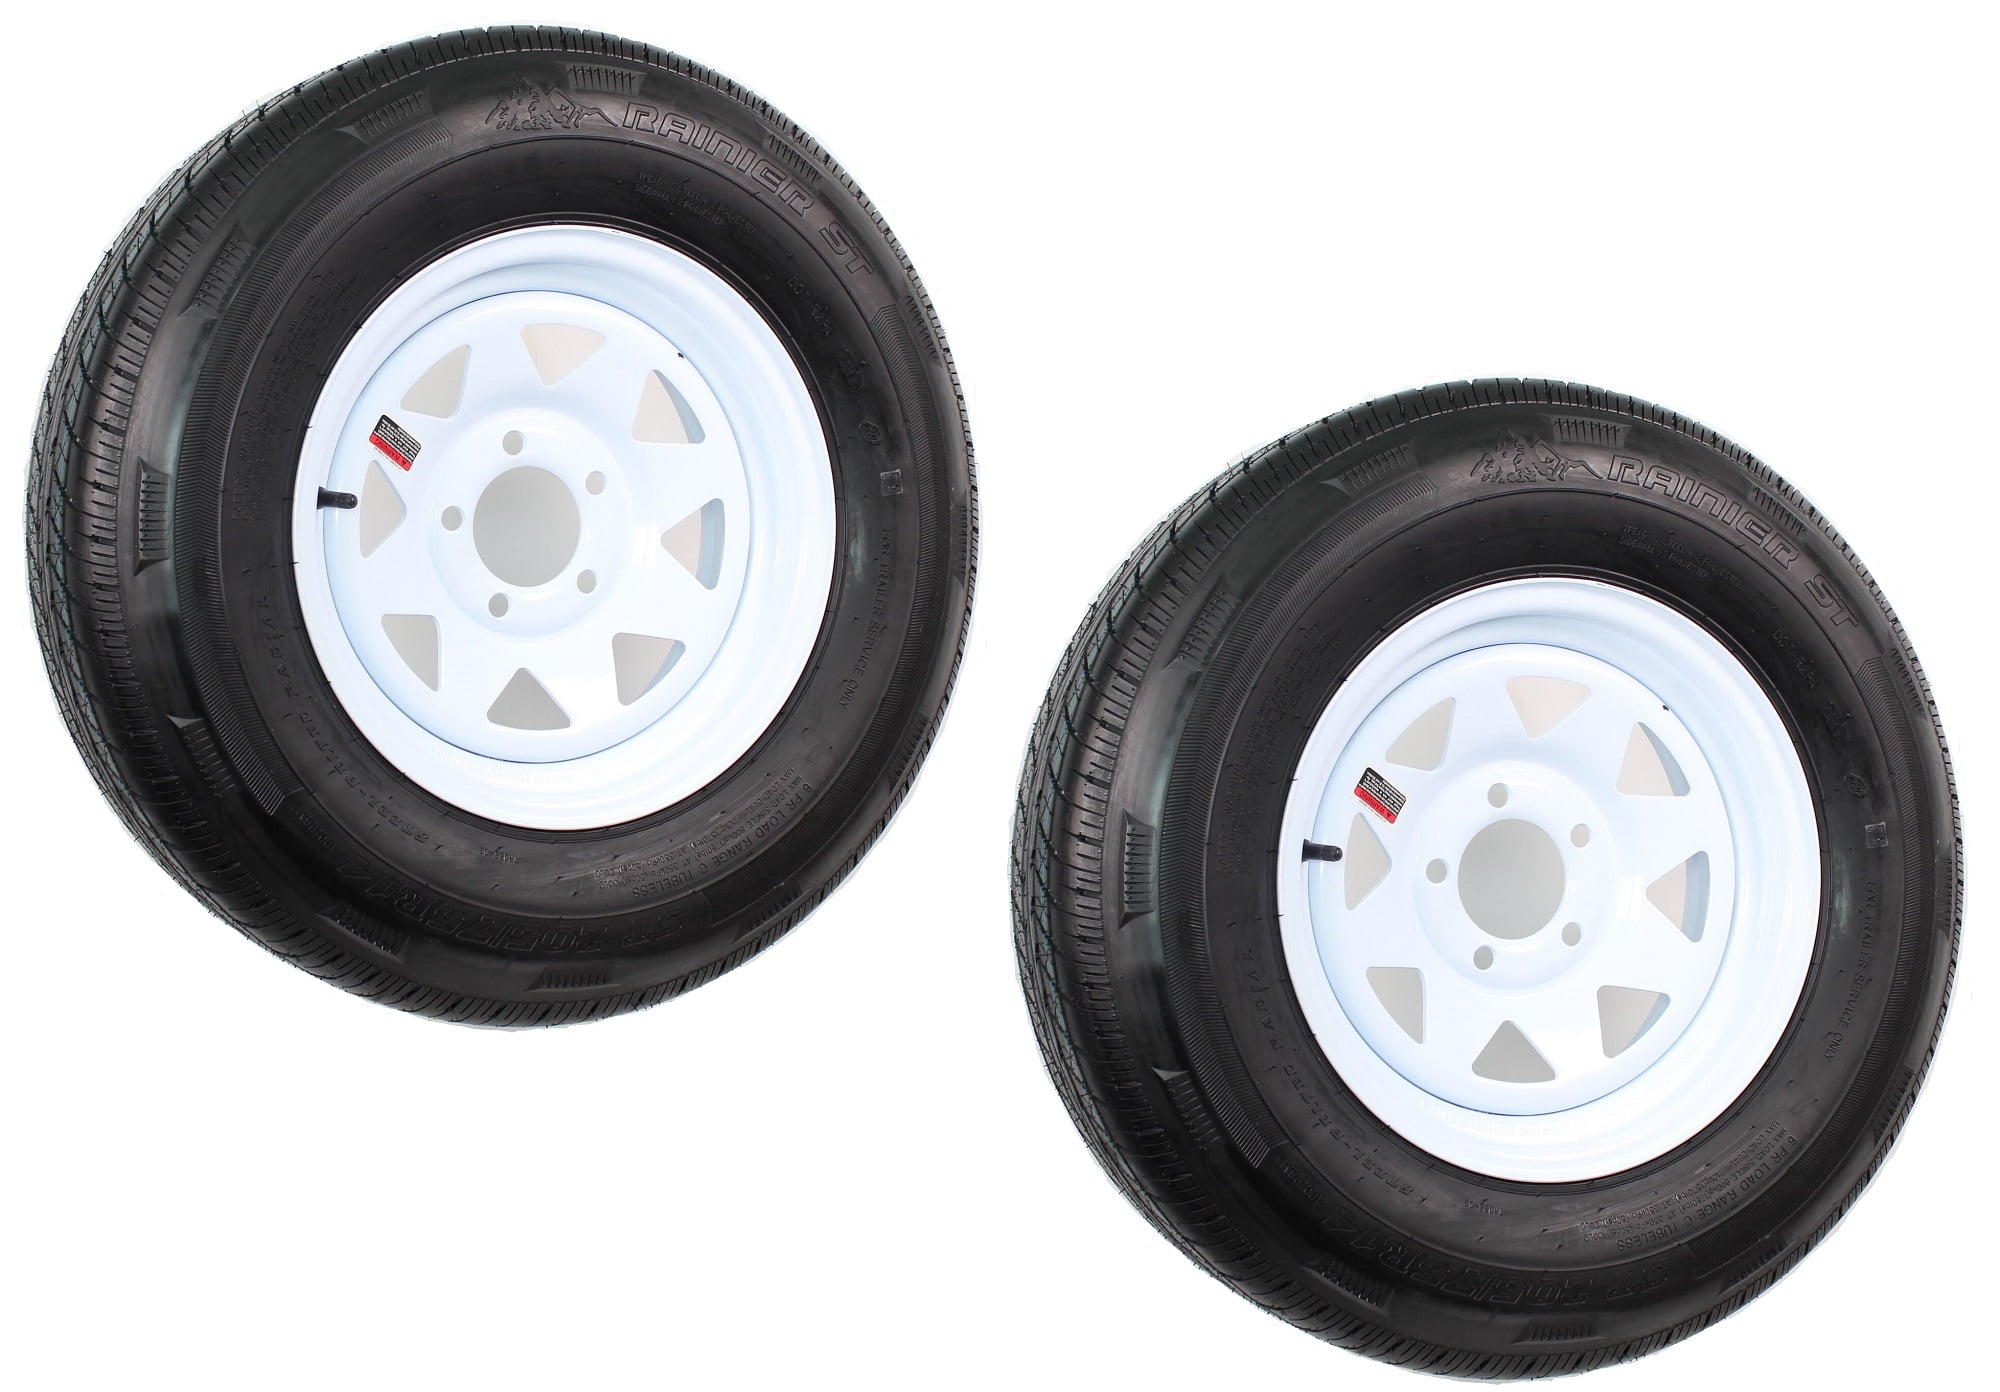 205-75-14 ST205-75R14 High Speed LOAD RANGE C 205-75R14 NORTH AMERICA D.O.T mounted on 5 bolt WHITE powder coated steel rim RADIAL trailer tire APPROVED